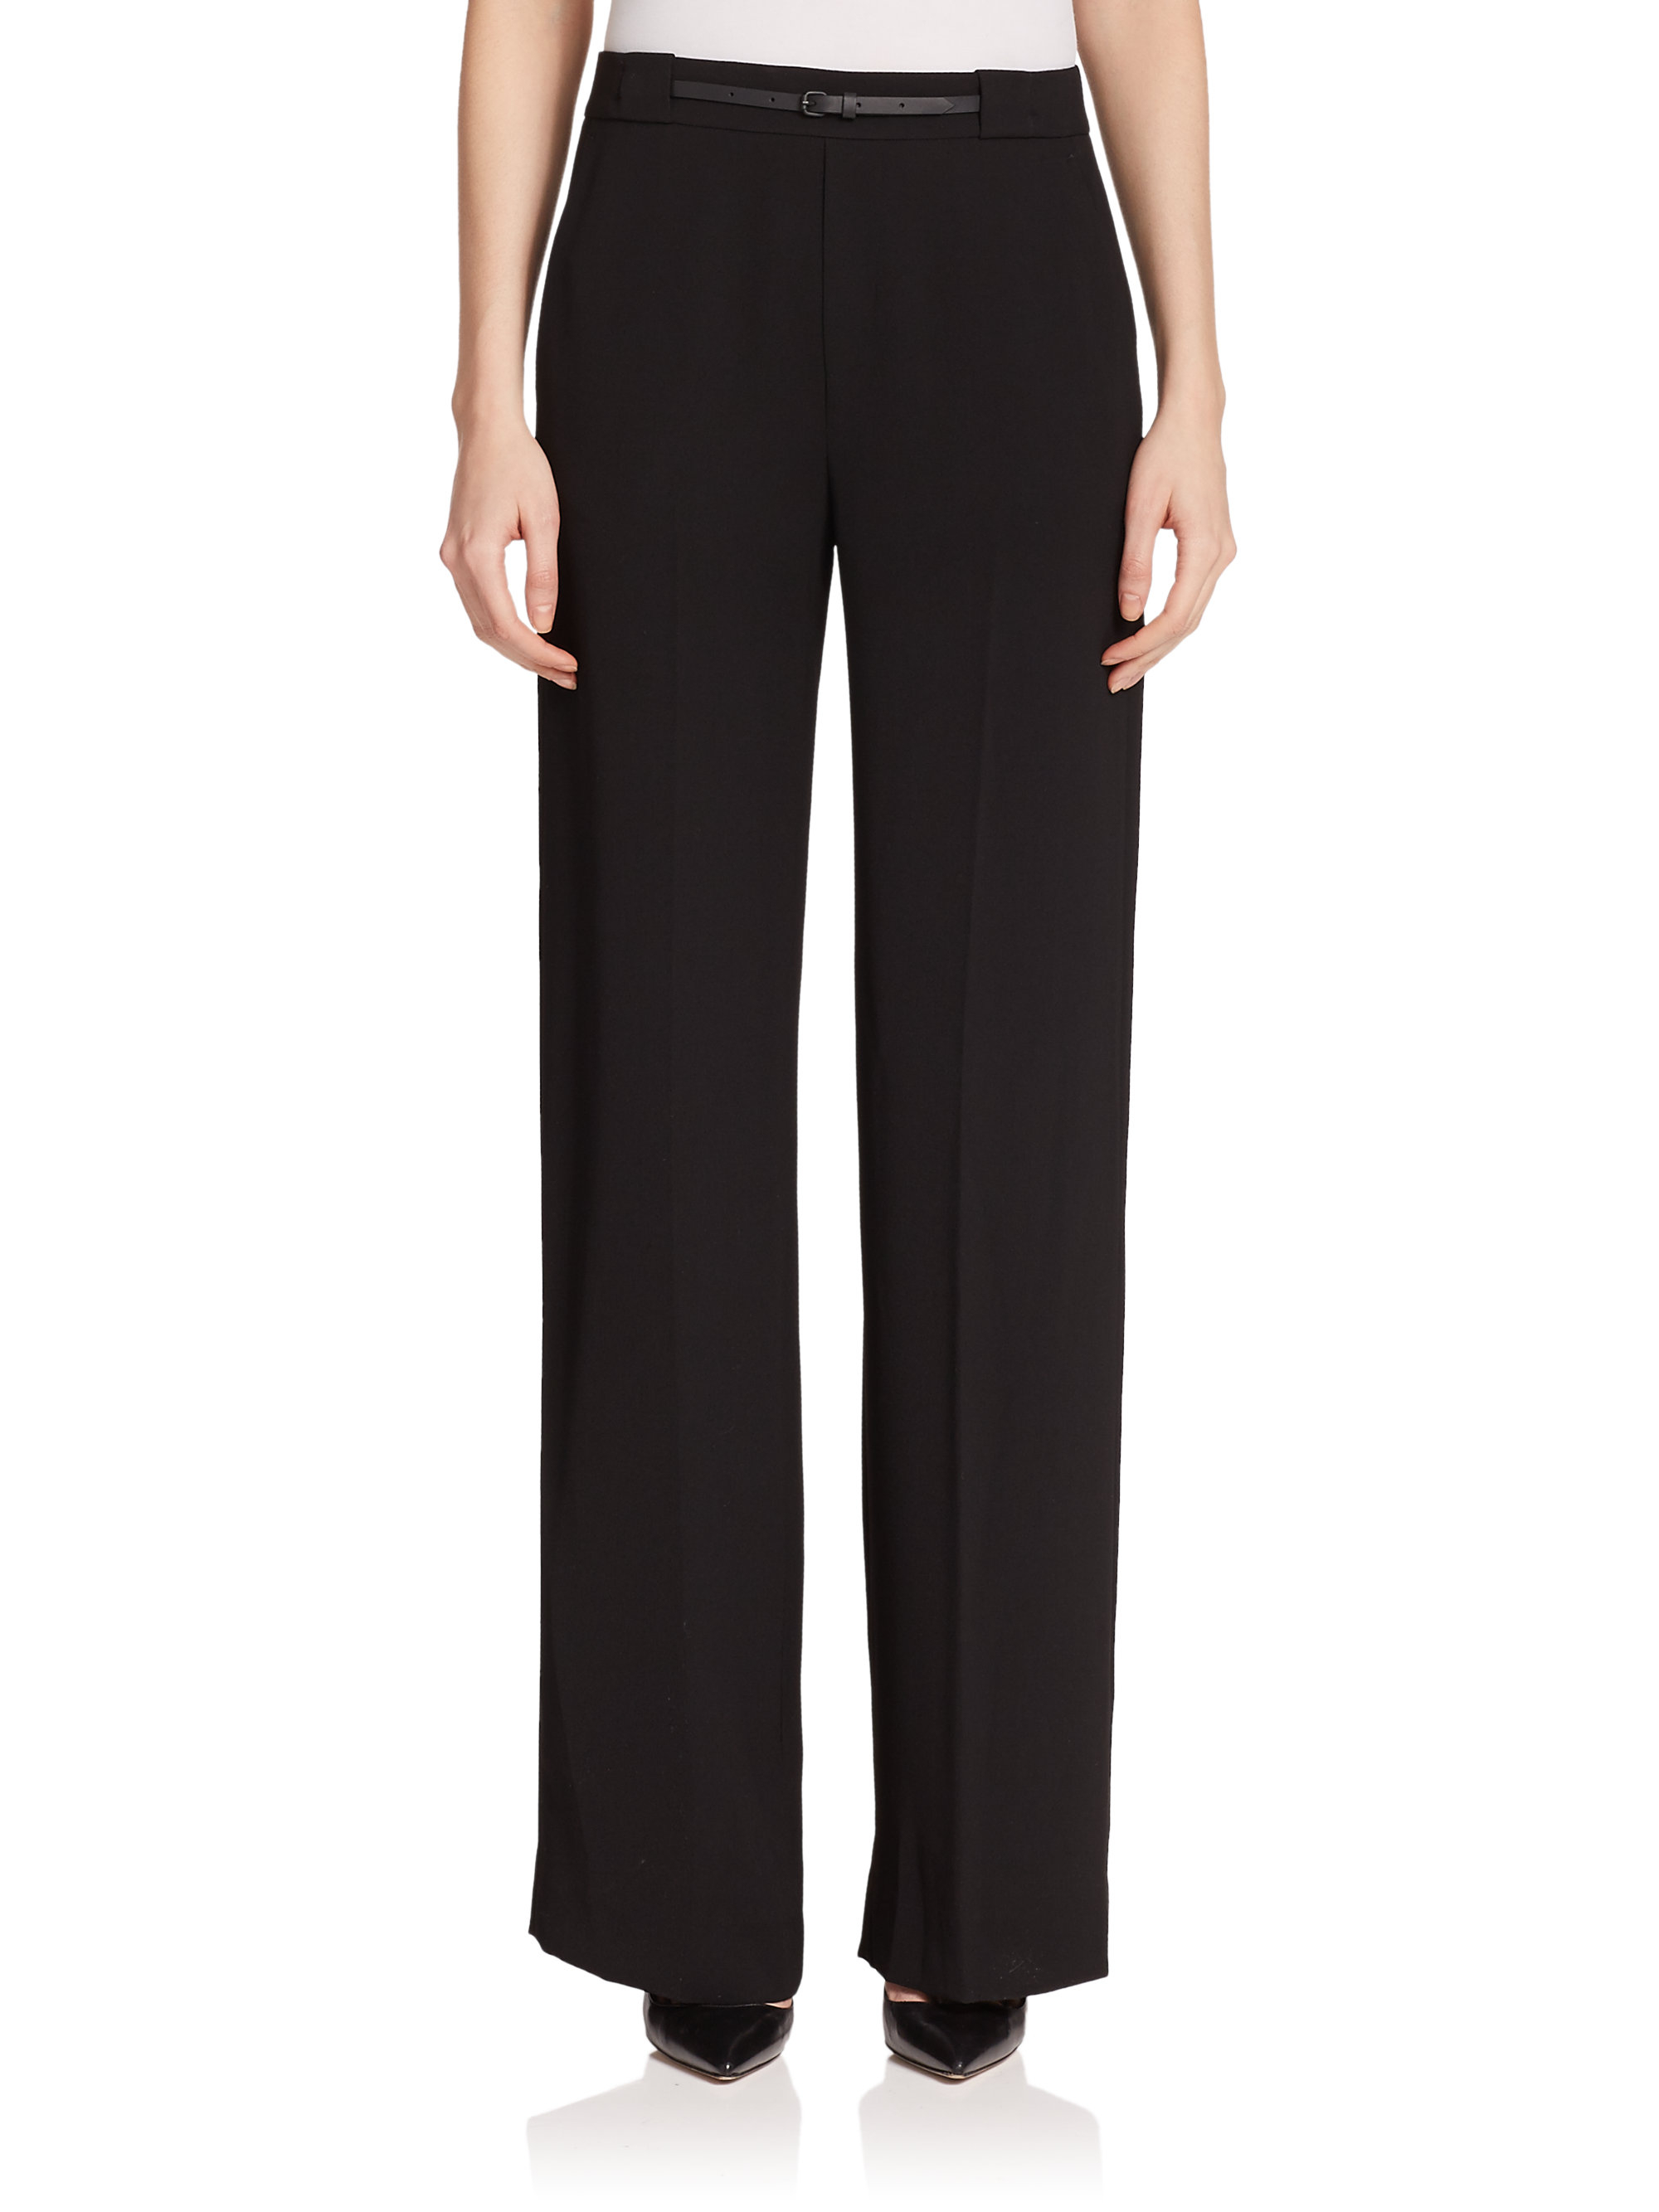 Lyst - Vince Belted High-waist Pants in Black